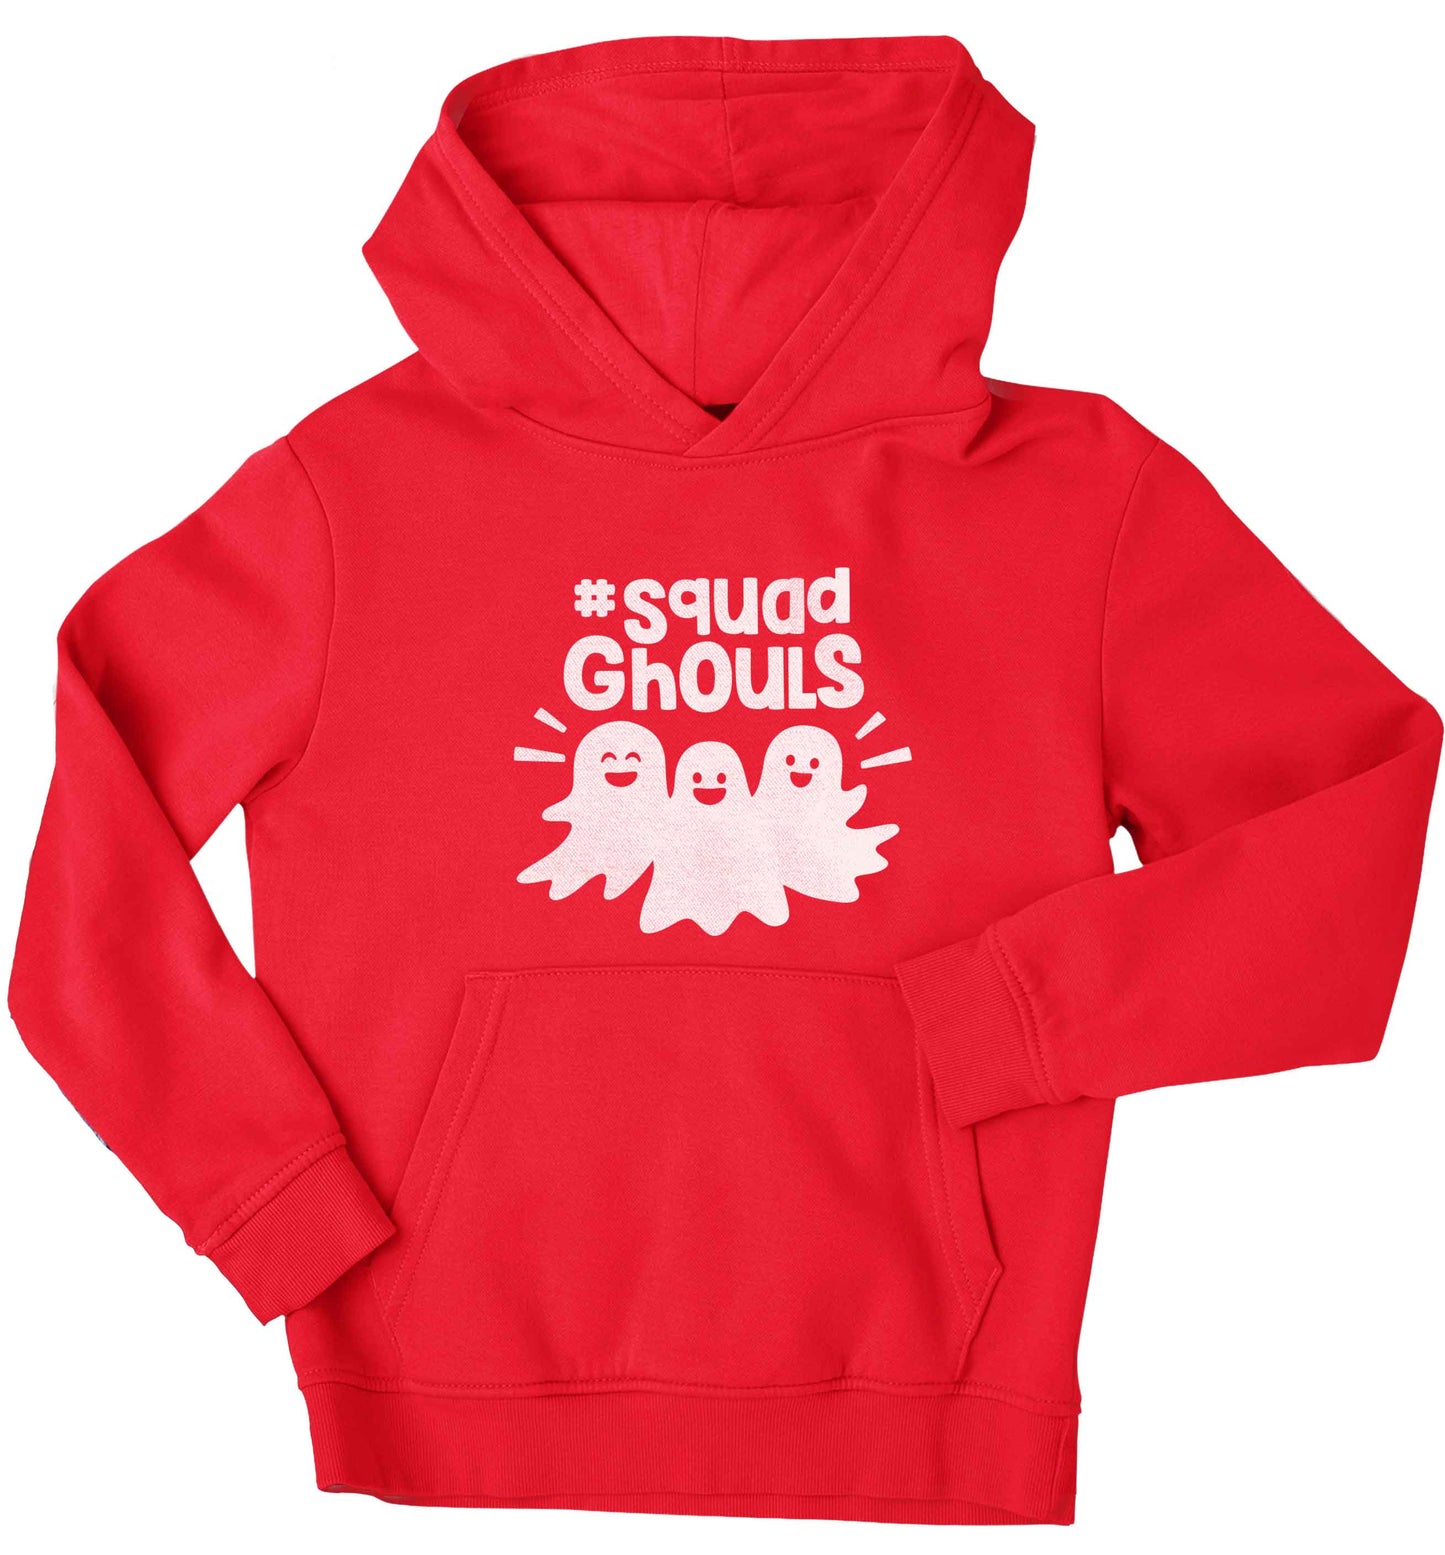 Squad ghouls Kit children's red hoodie 12-13 Years